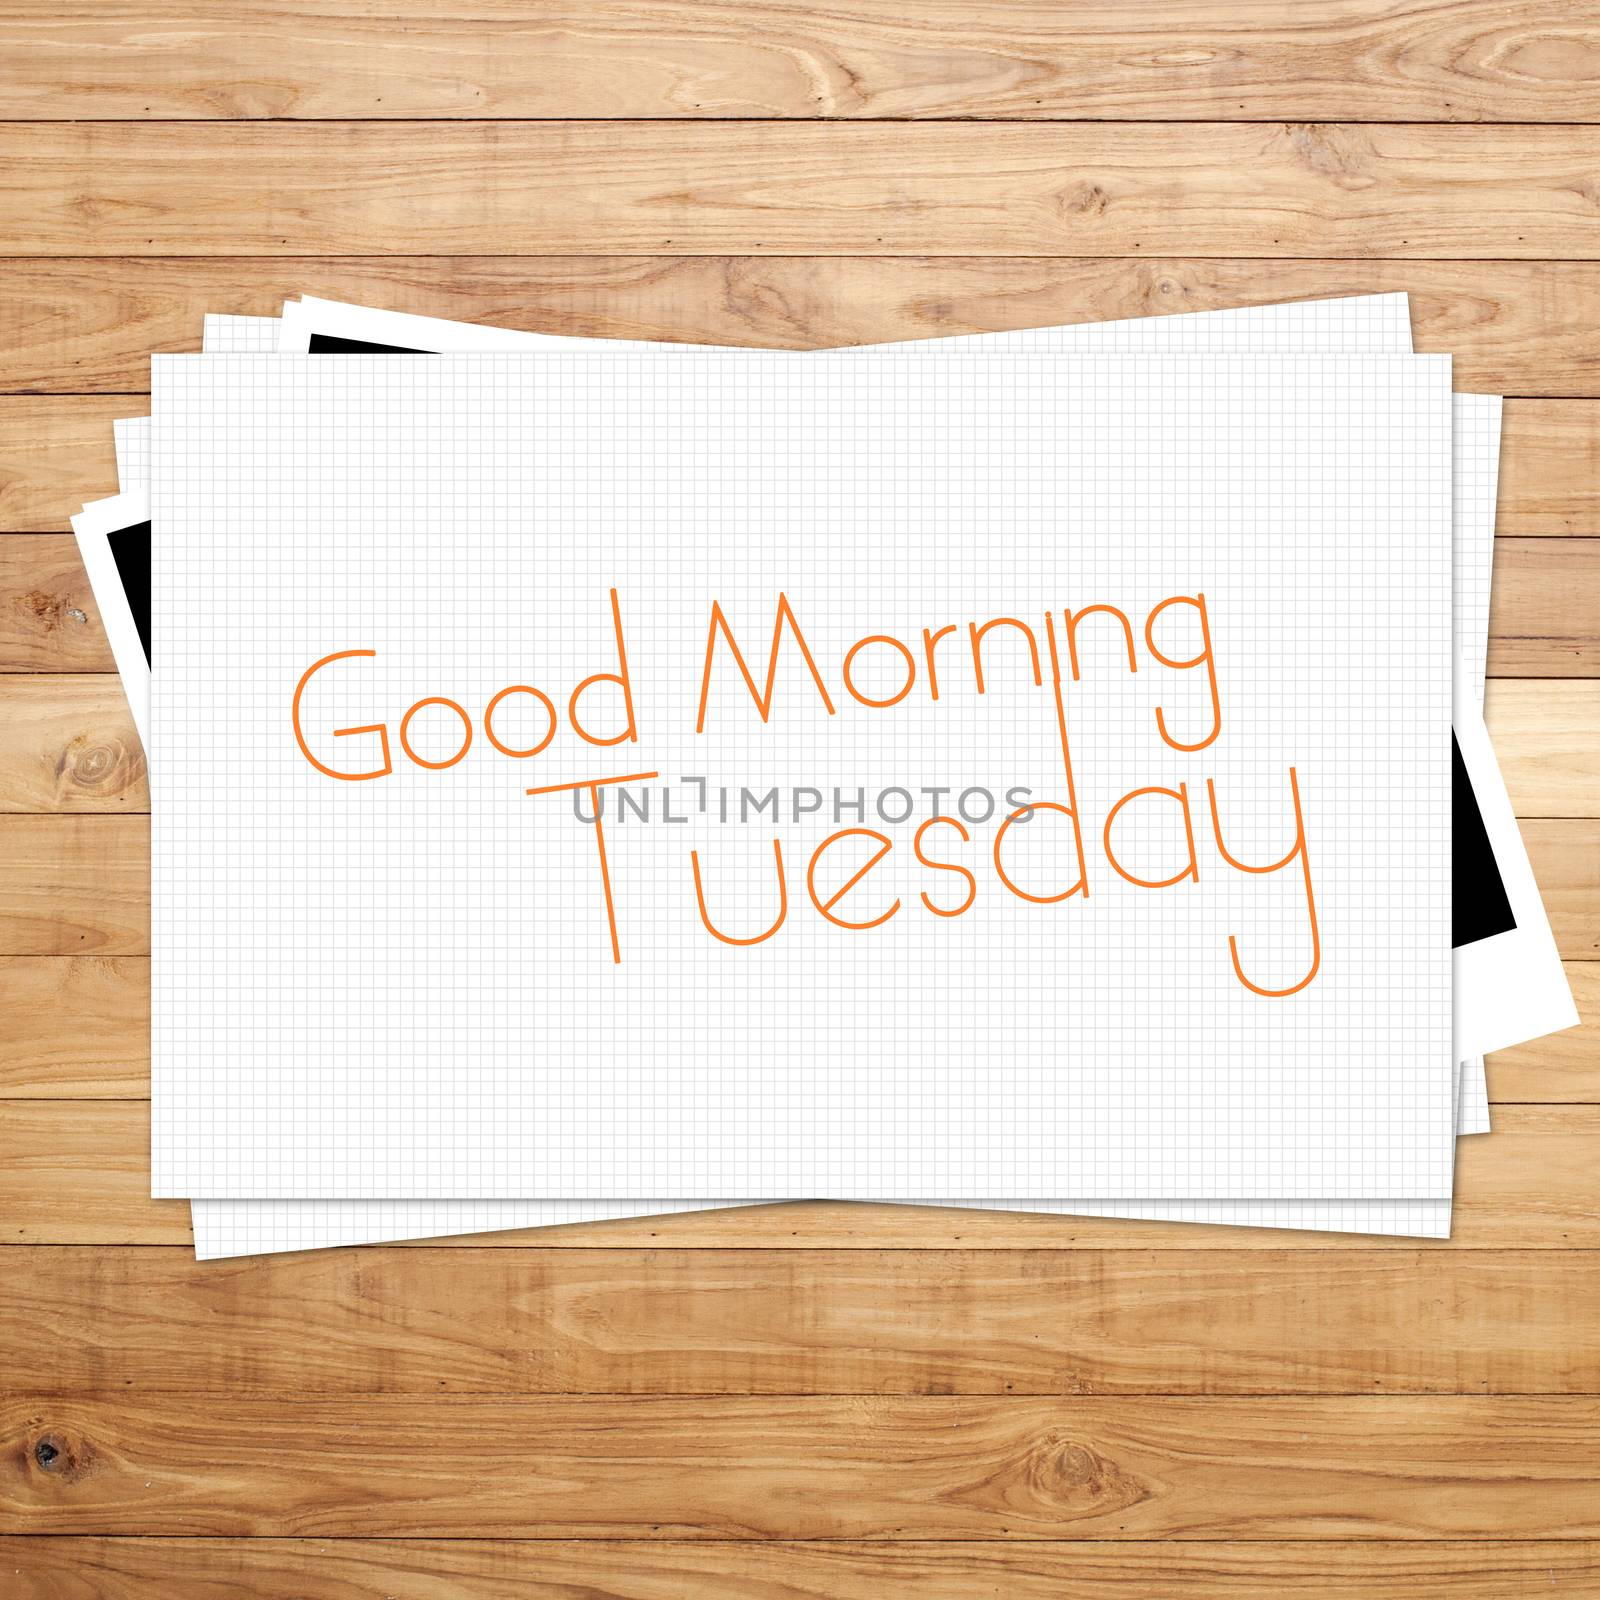 Good Morning Tuesday on paper and Brown wood plank background